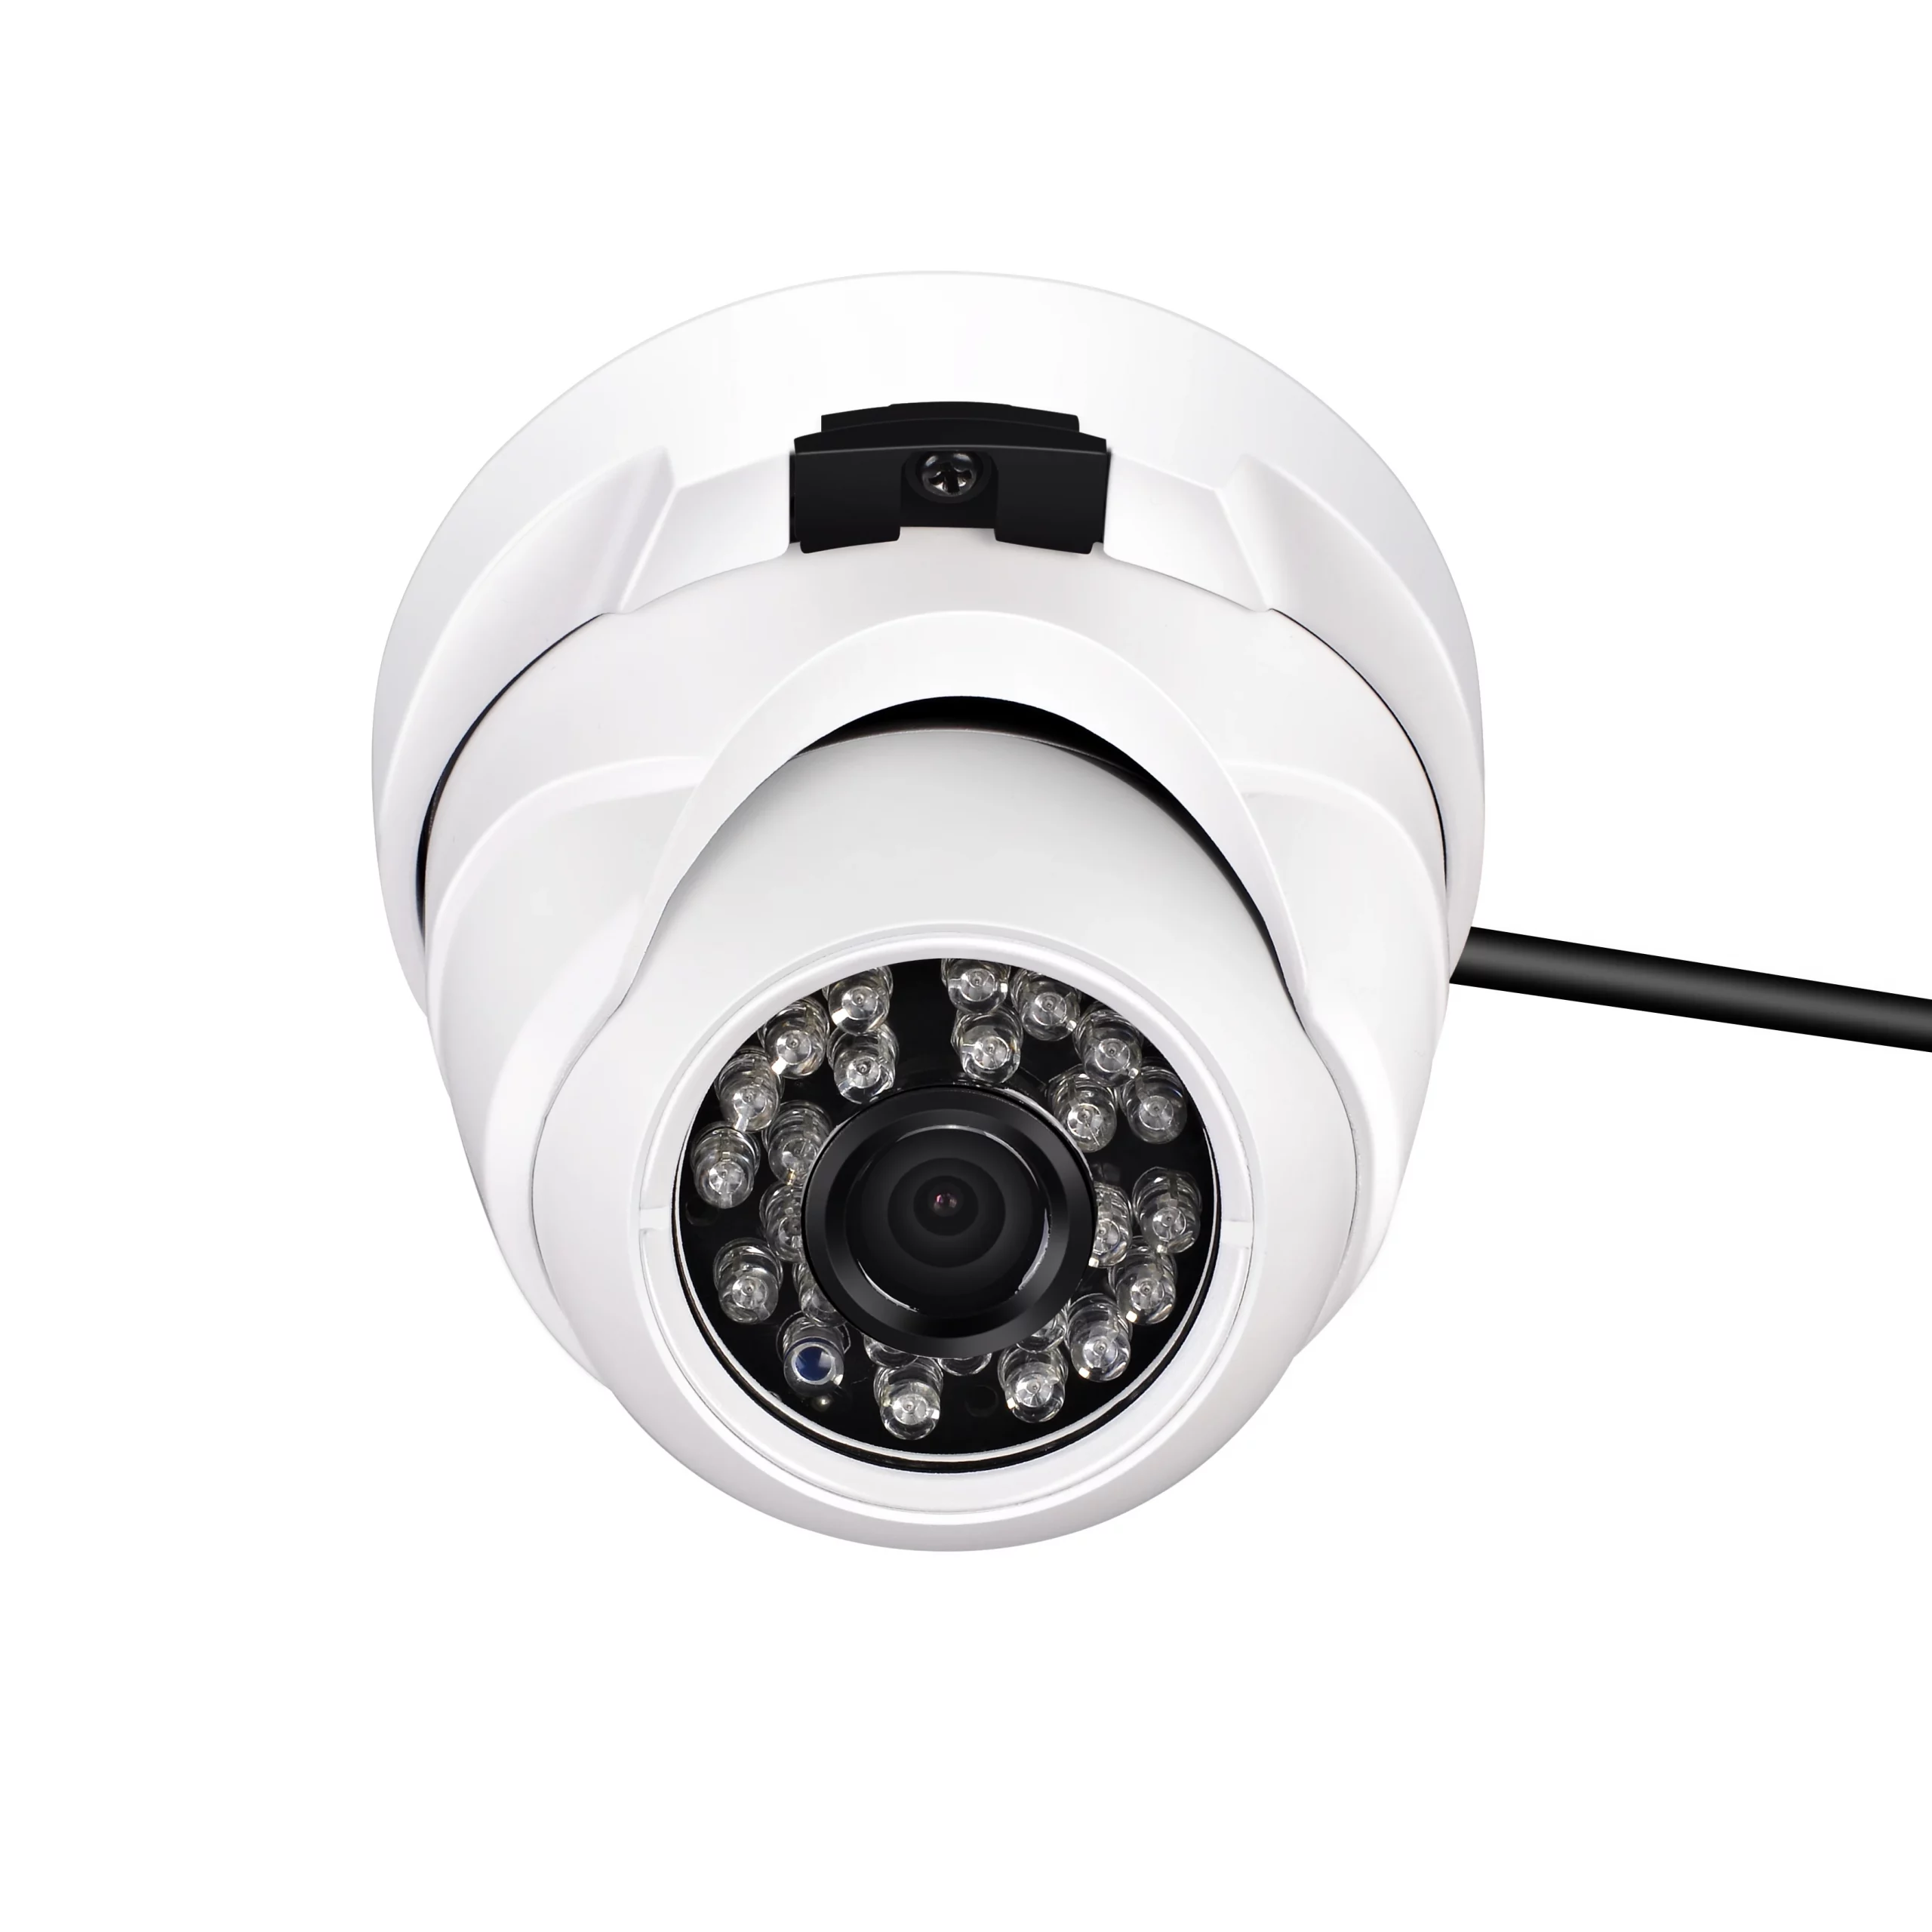 FENGHE Best Sellers Outdoor AHD Camera 1080P